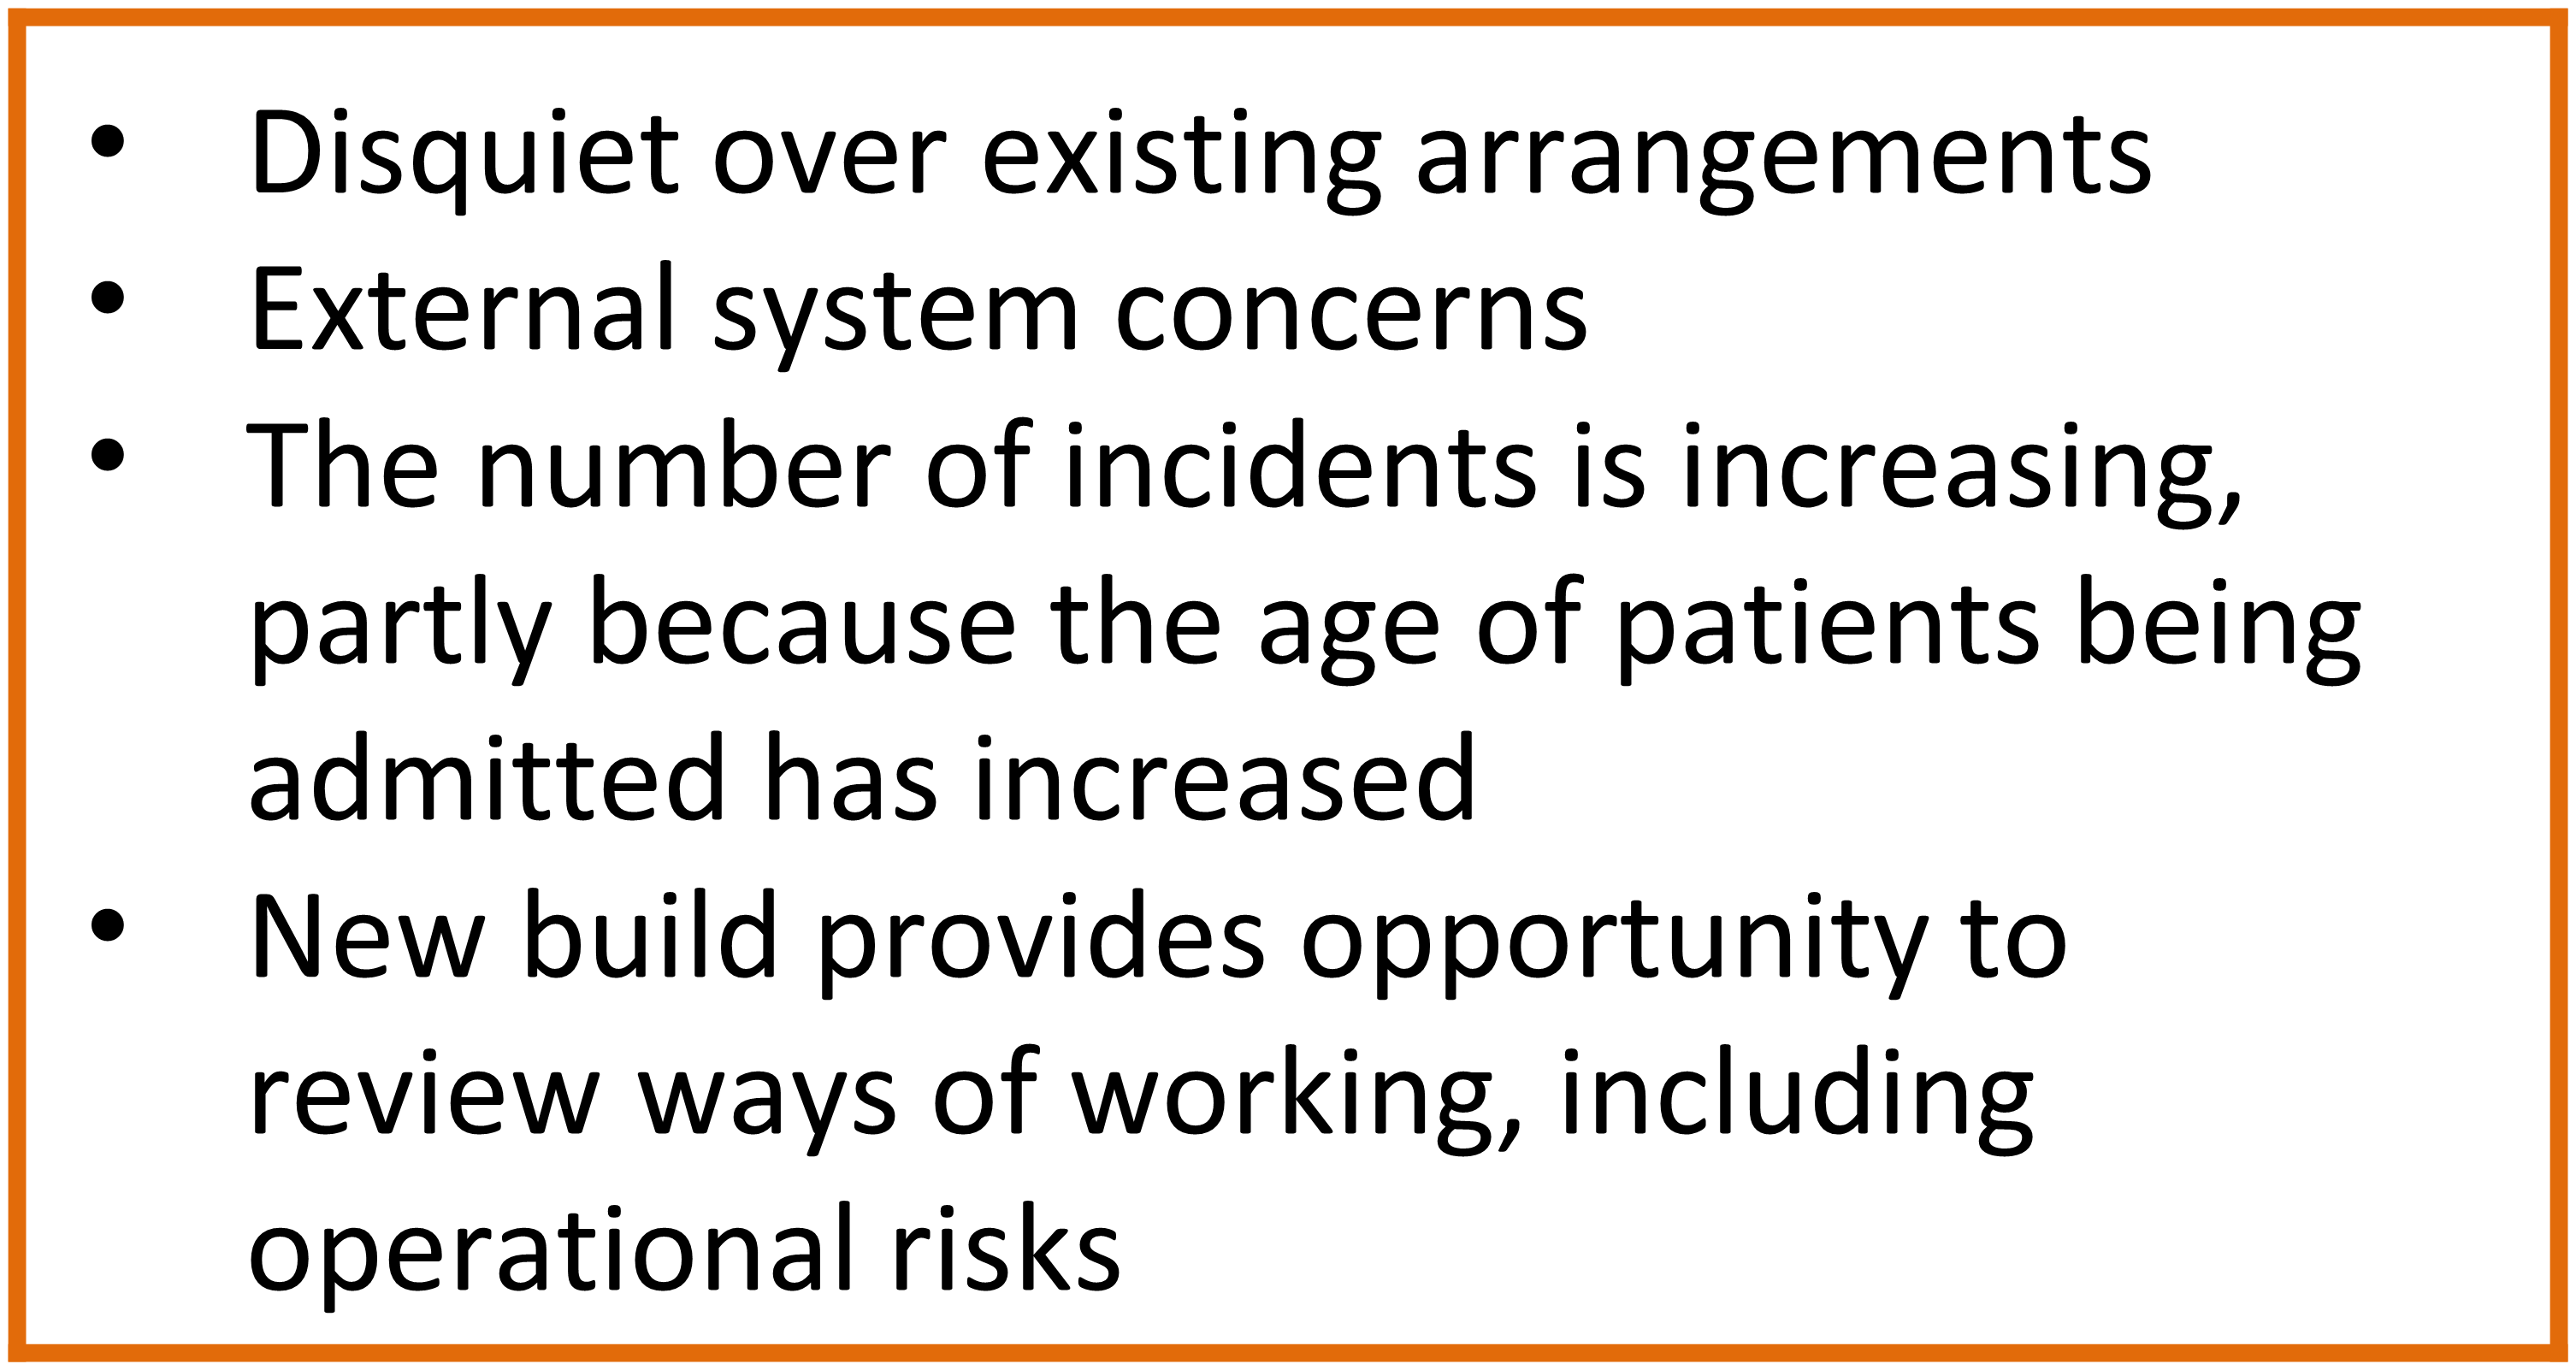 The reasons for carrying out the example SSA were: disquiet over existing arrangements; external system concerns; the number of incidents is increasing, partly because the age of patients being admitted has increased; and new build provides opportunity to review ways of working, including operational risks.